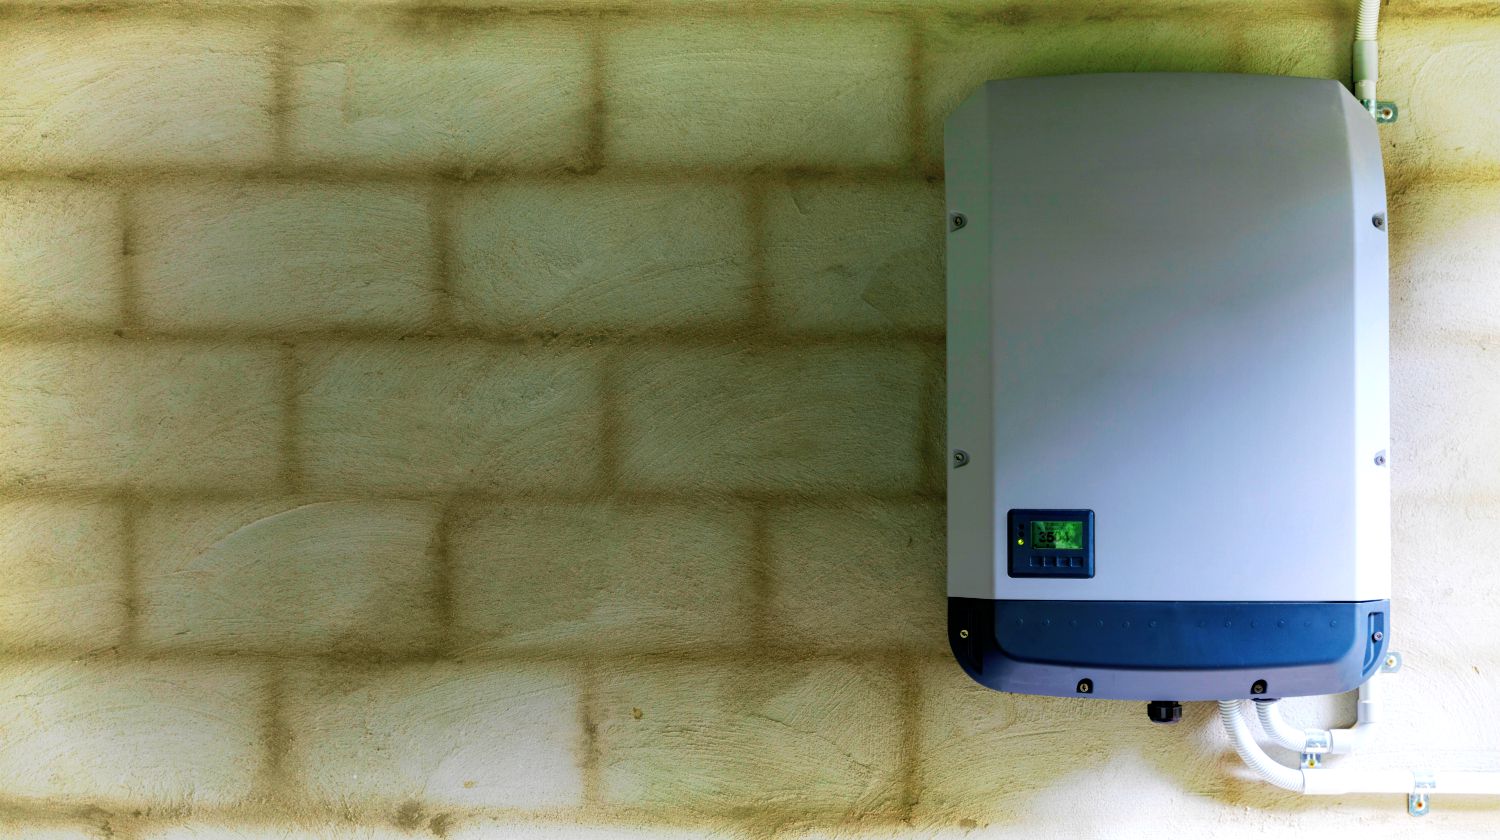 Feature | Solar power inverter mounted on brick wall inside garage | A New Take On Alternative Energy: The Tesla Powerwall